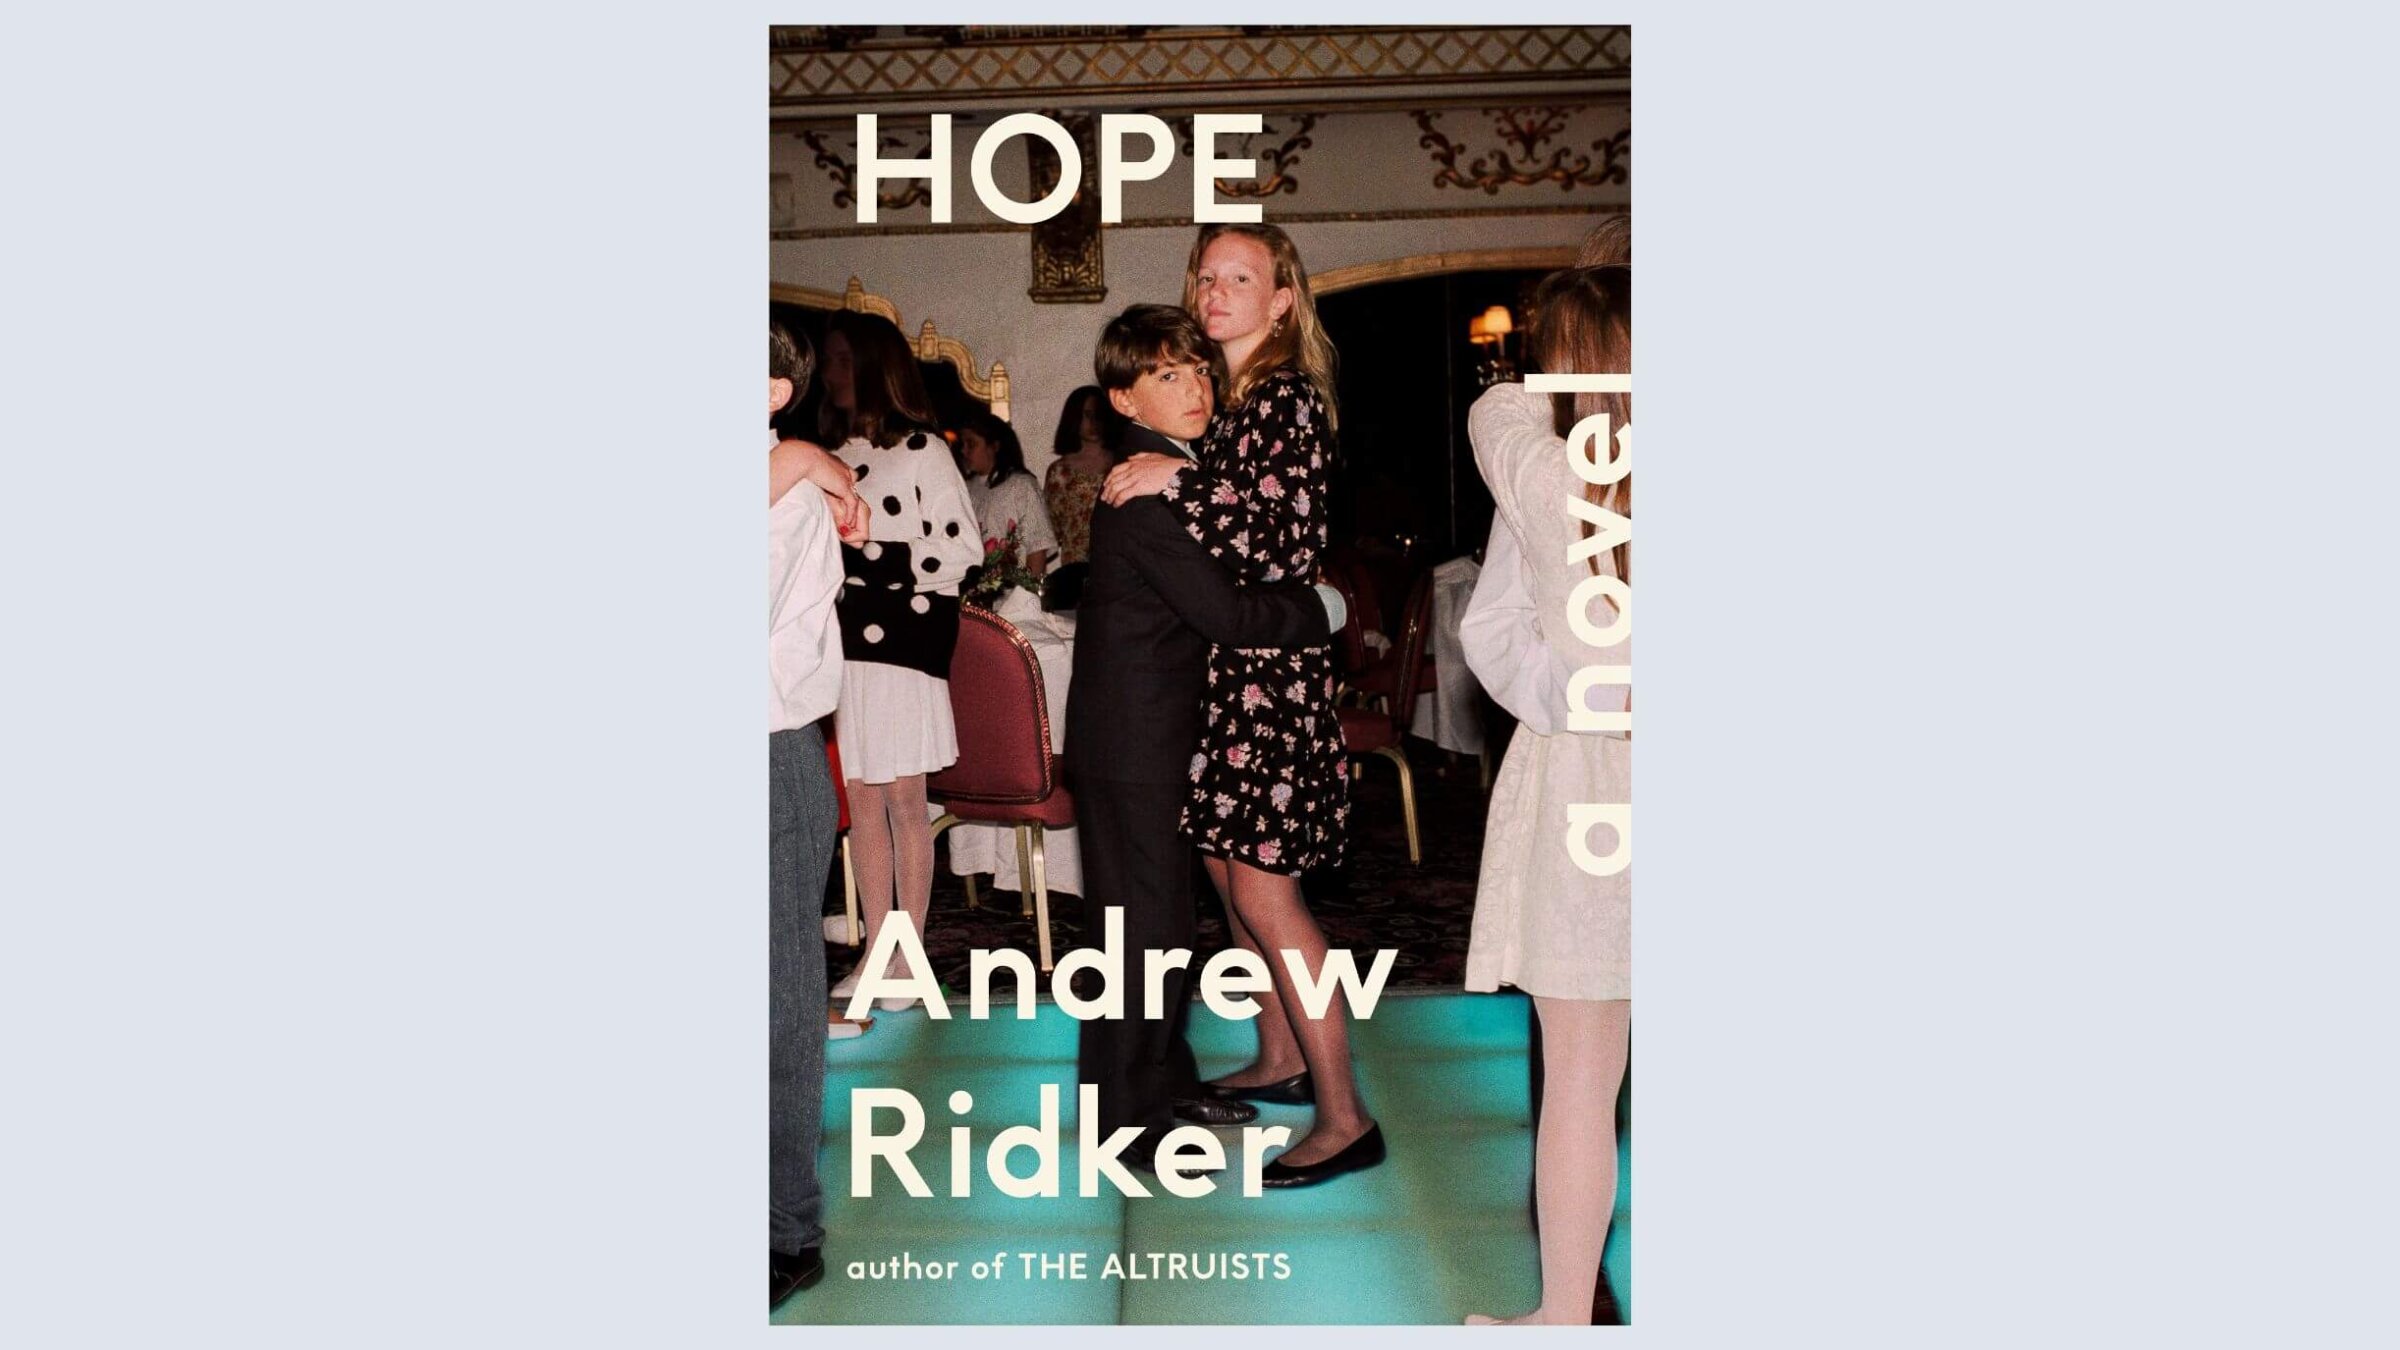 Andrew Ridker found the perfect photo for the cover of his second novel — but finding its subjects was anything but easy.